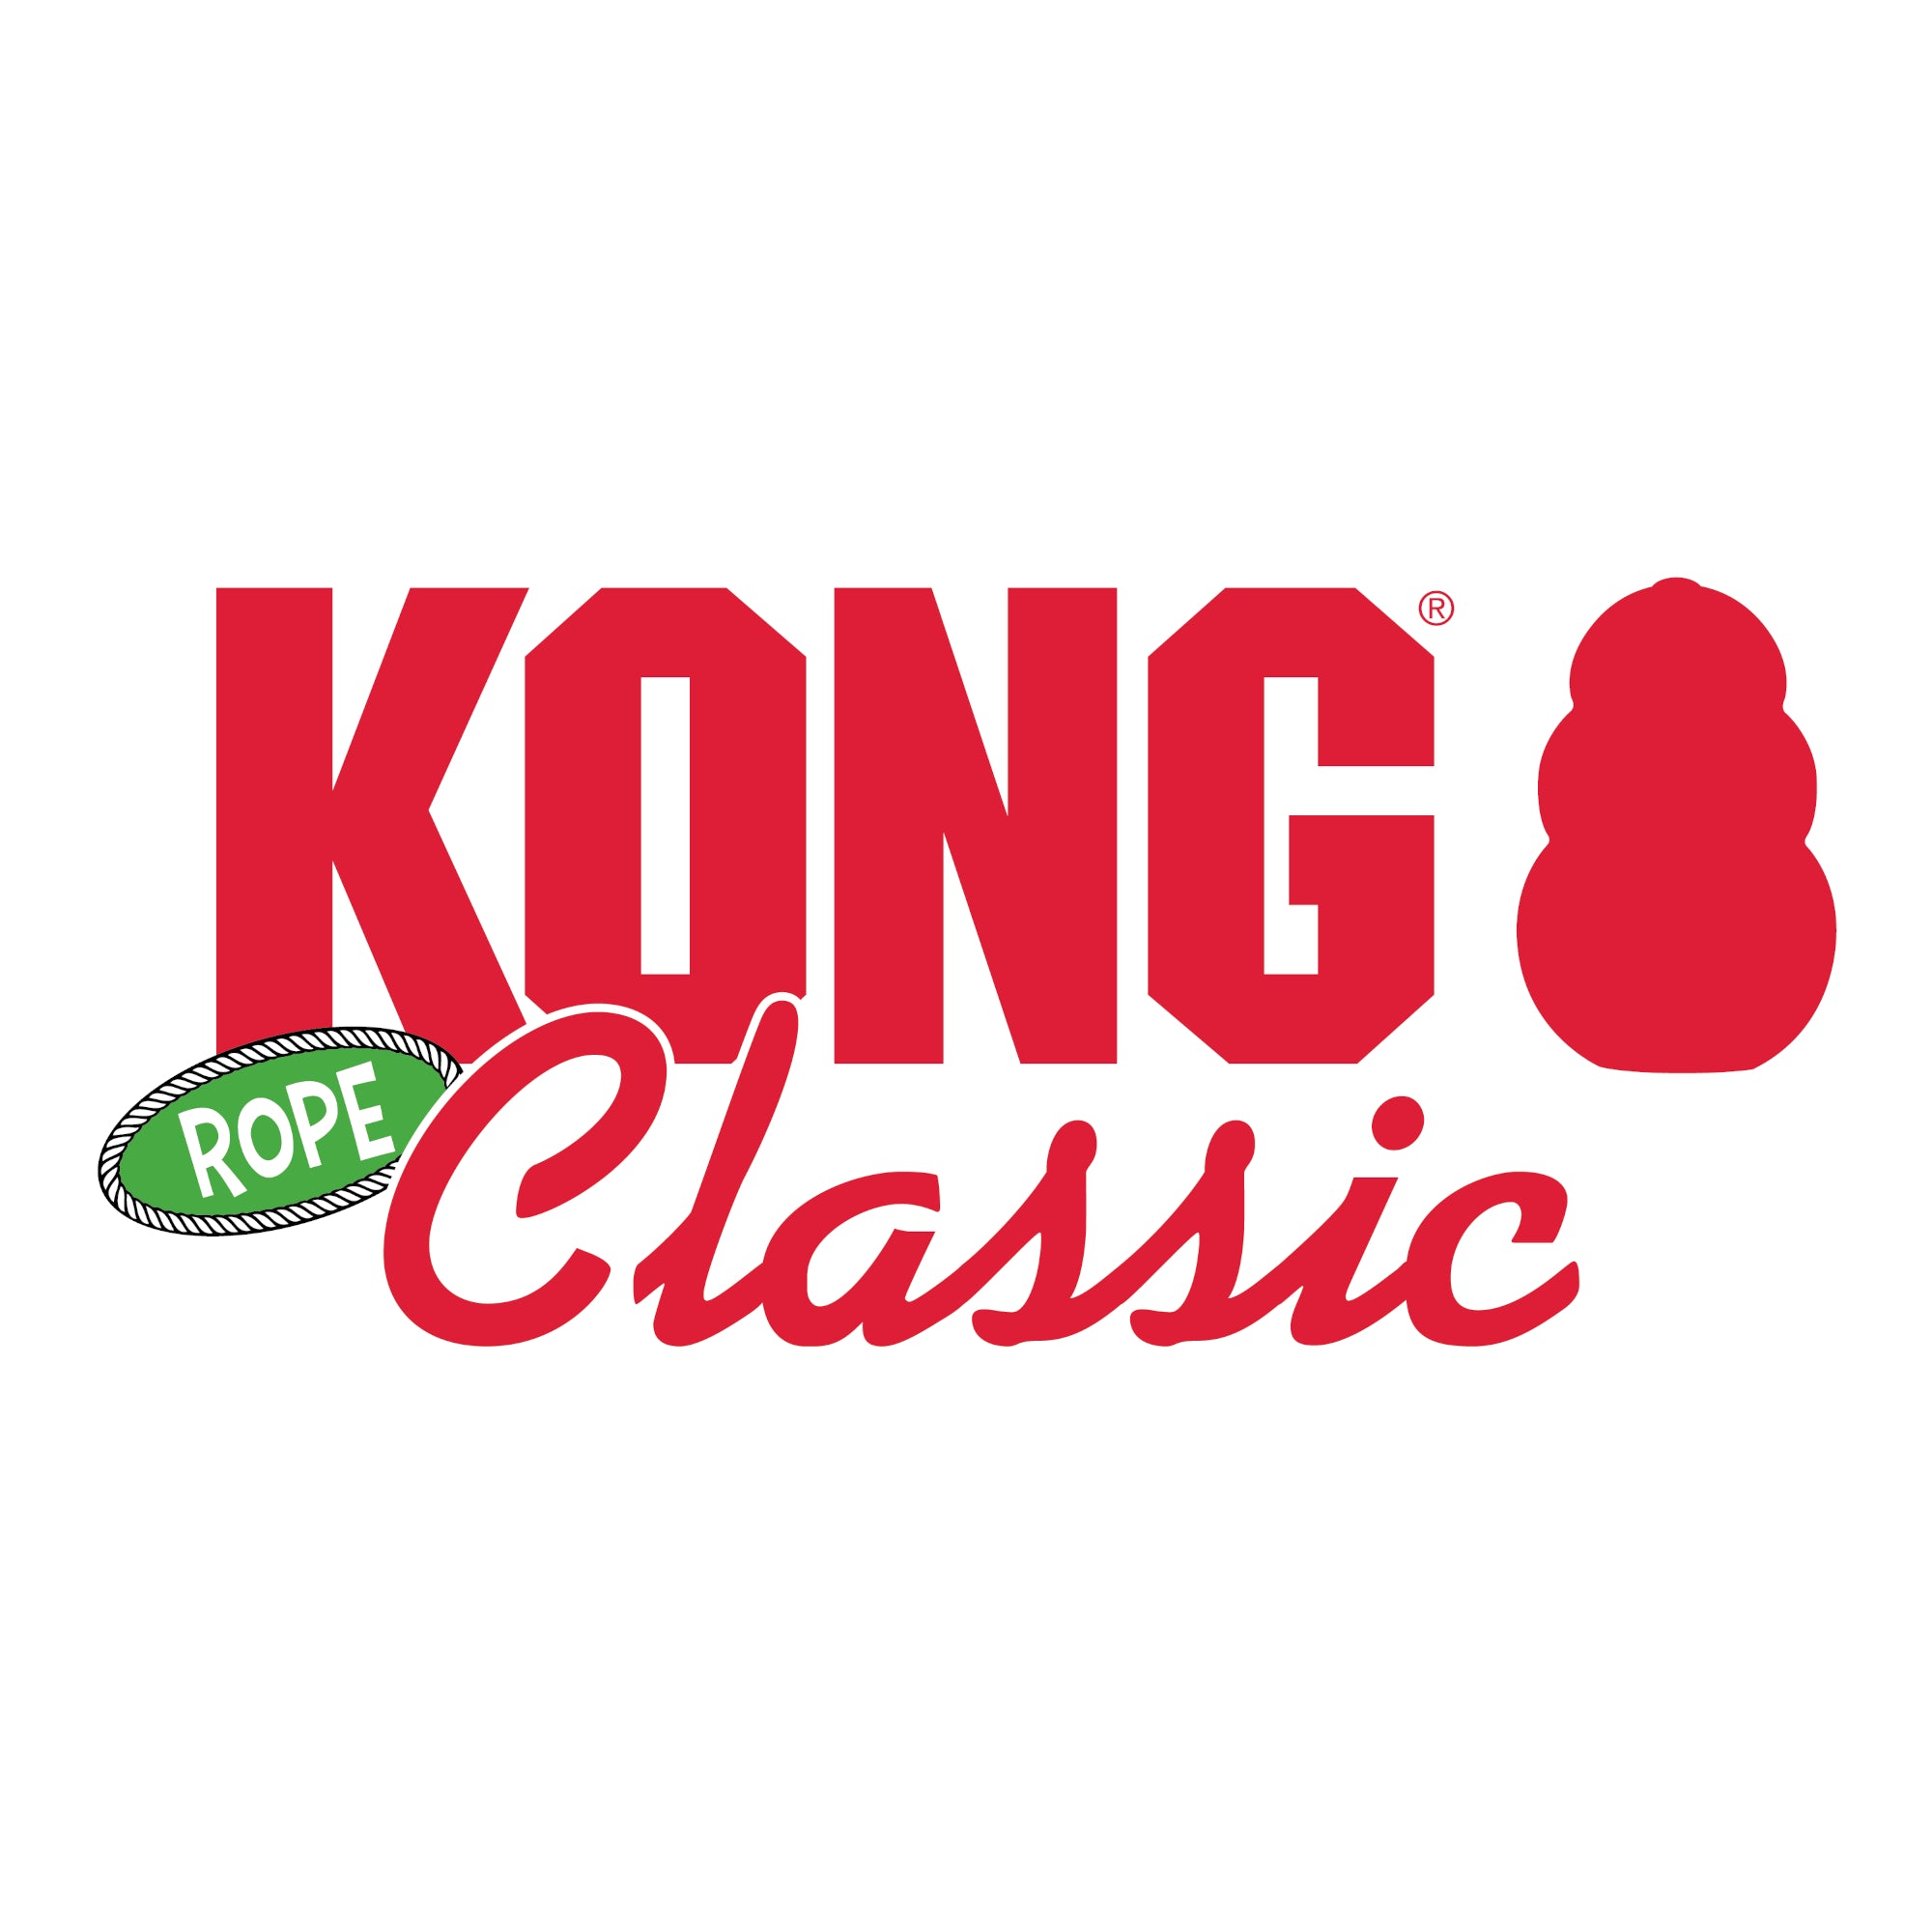 KONG Classic with Rope